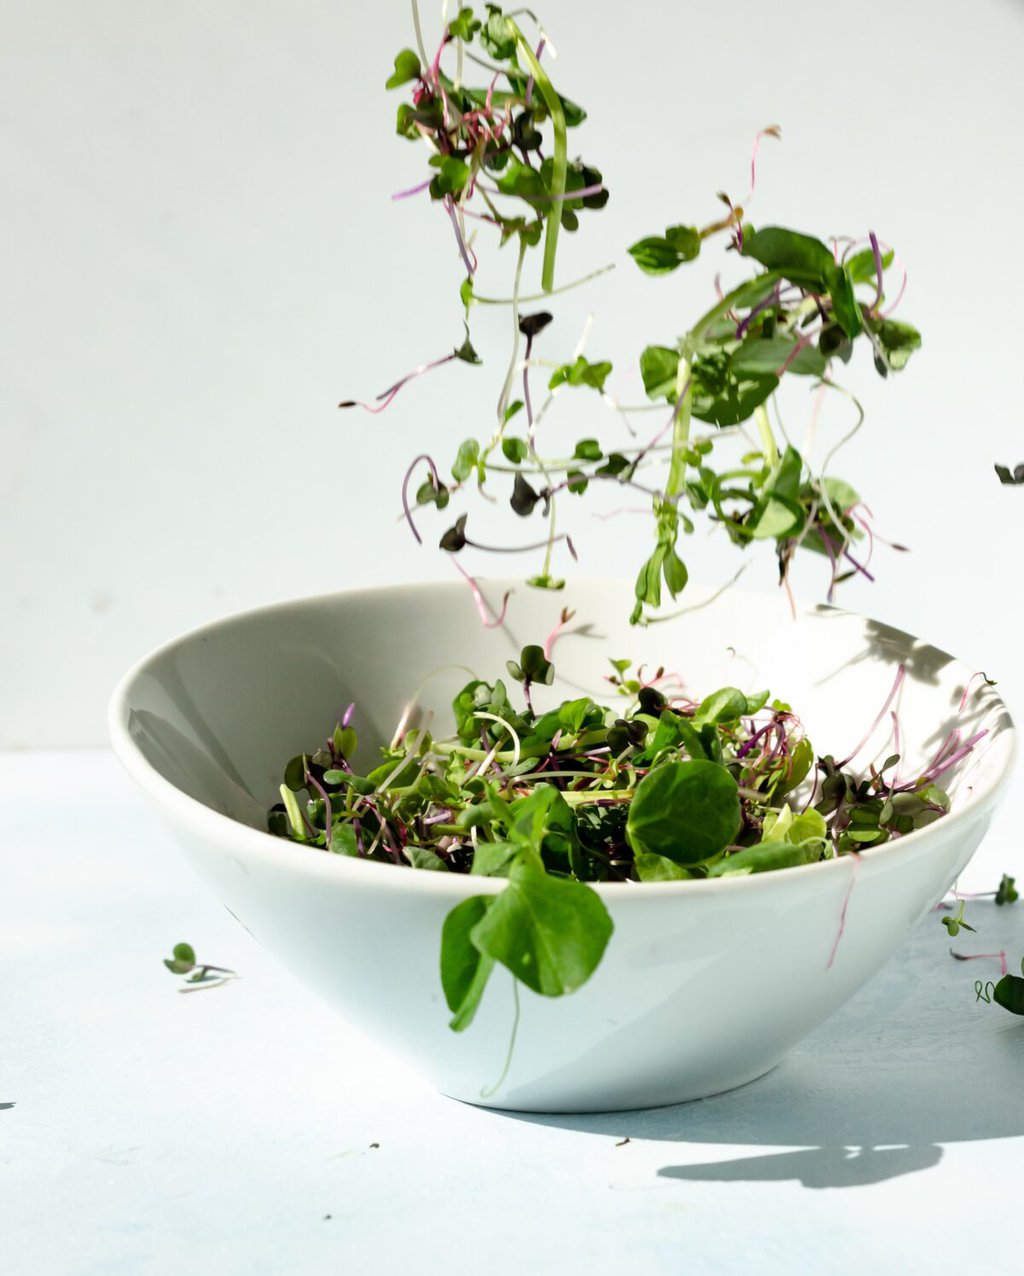 Your How To Guide To Growing Microgreens